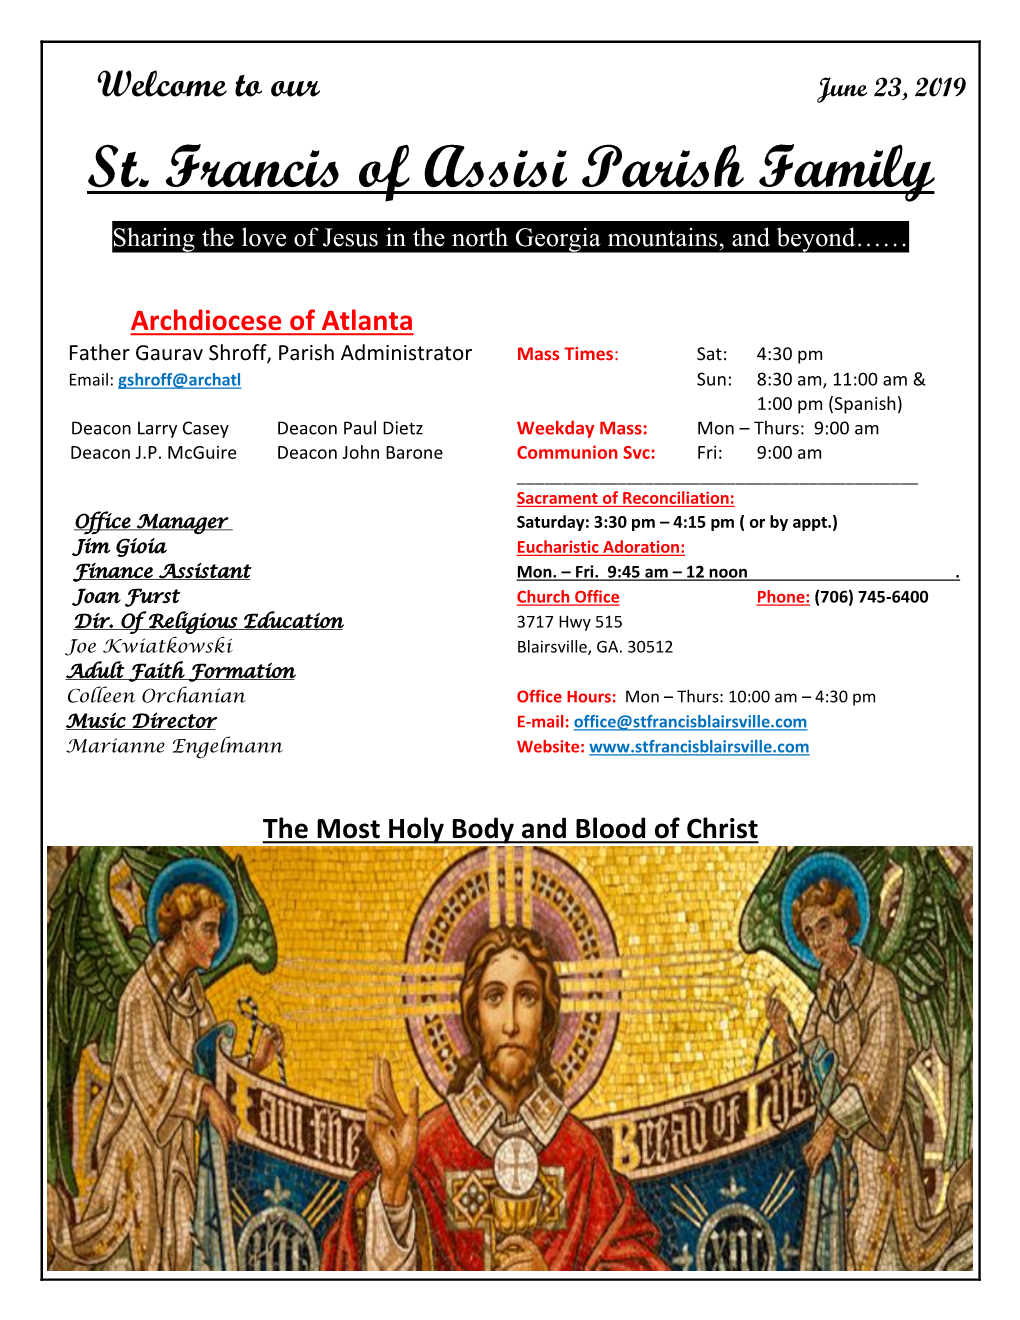 Our June 23, 2019 St. Francis of Assisi Parish Family